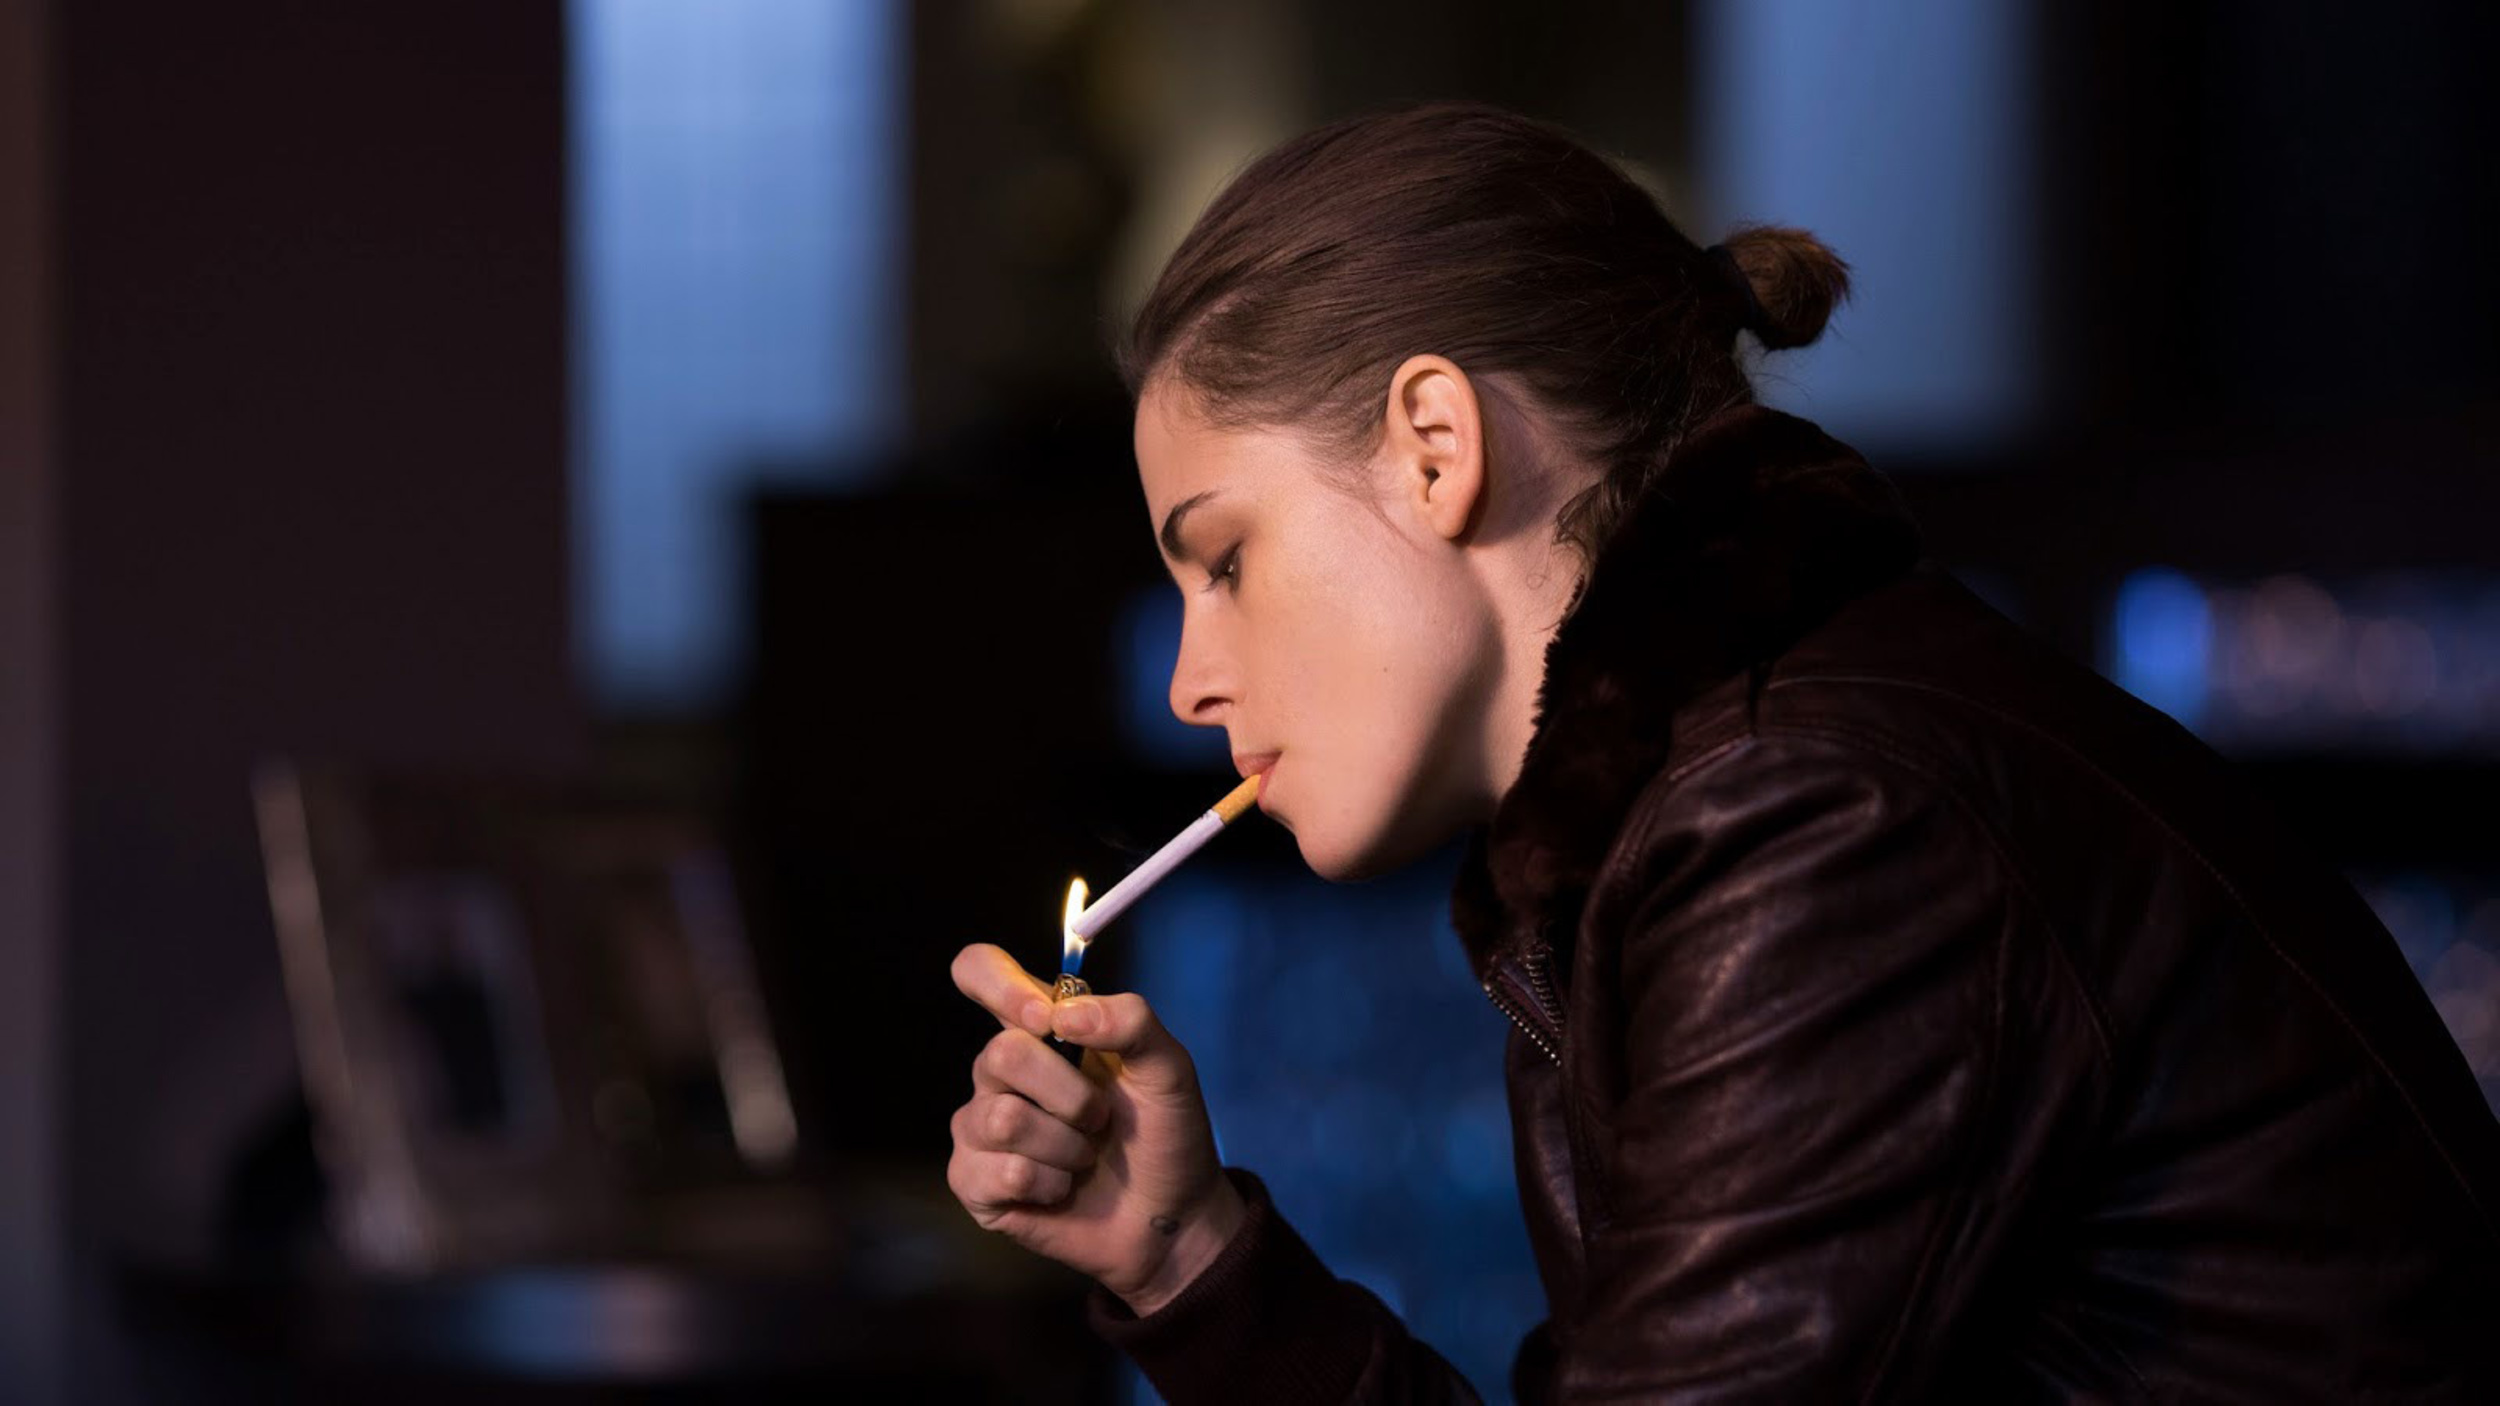 <p>The idea of spending most of a film in an empty apartment with a celebrity’s personal shopper might sound positively tedious, but Olivier Assayas’ 2016 triumph turns this premise into a stylishly strange and unconventionally eerie ghost story. Kristen Stewart is spellbinding as a young woman who, when she’s not picking up or returning impossibly glamorous clothing for her supermodel employer, is keen to make contact with the spirit of her recently departed twin brother. As bizarre, unexplained phenomena begin occurring in Stewart’s life, Assayas ratchets up the suspense in wholly unexpected ways.</p>